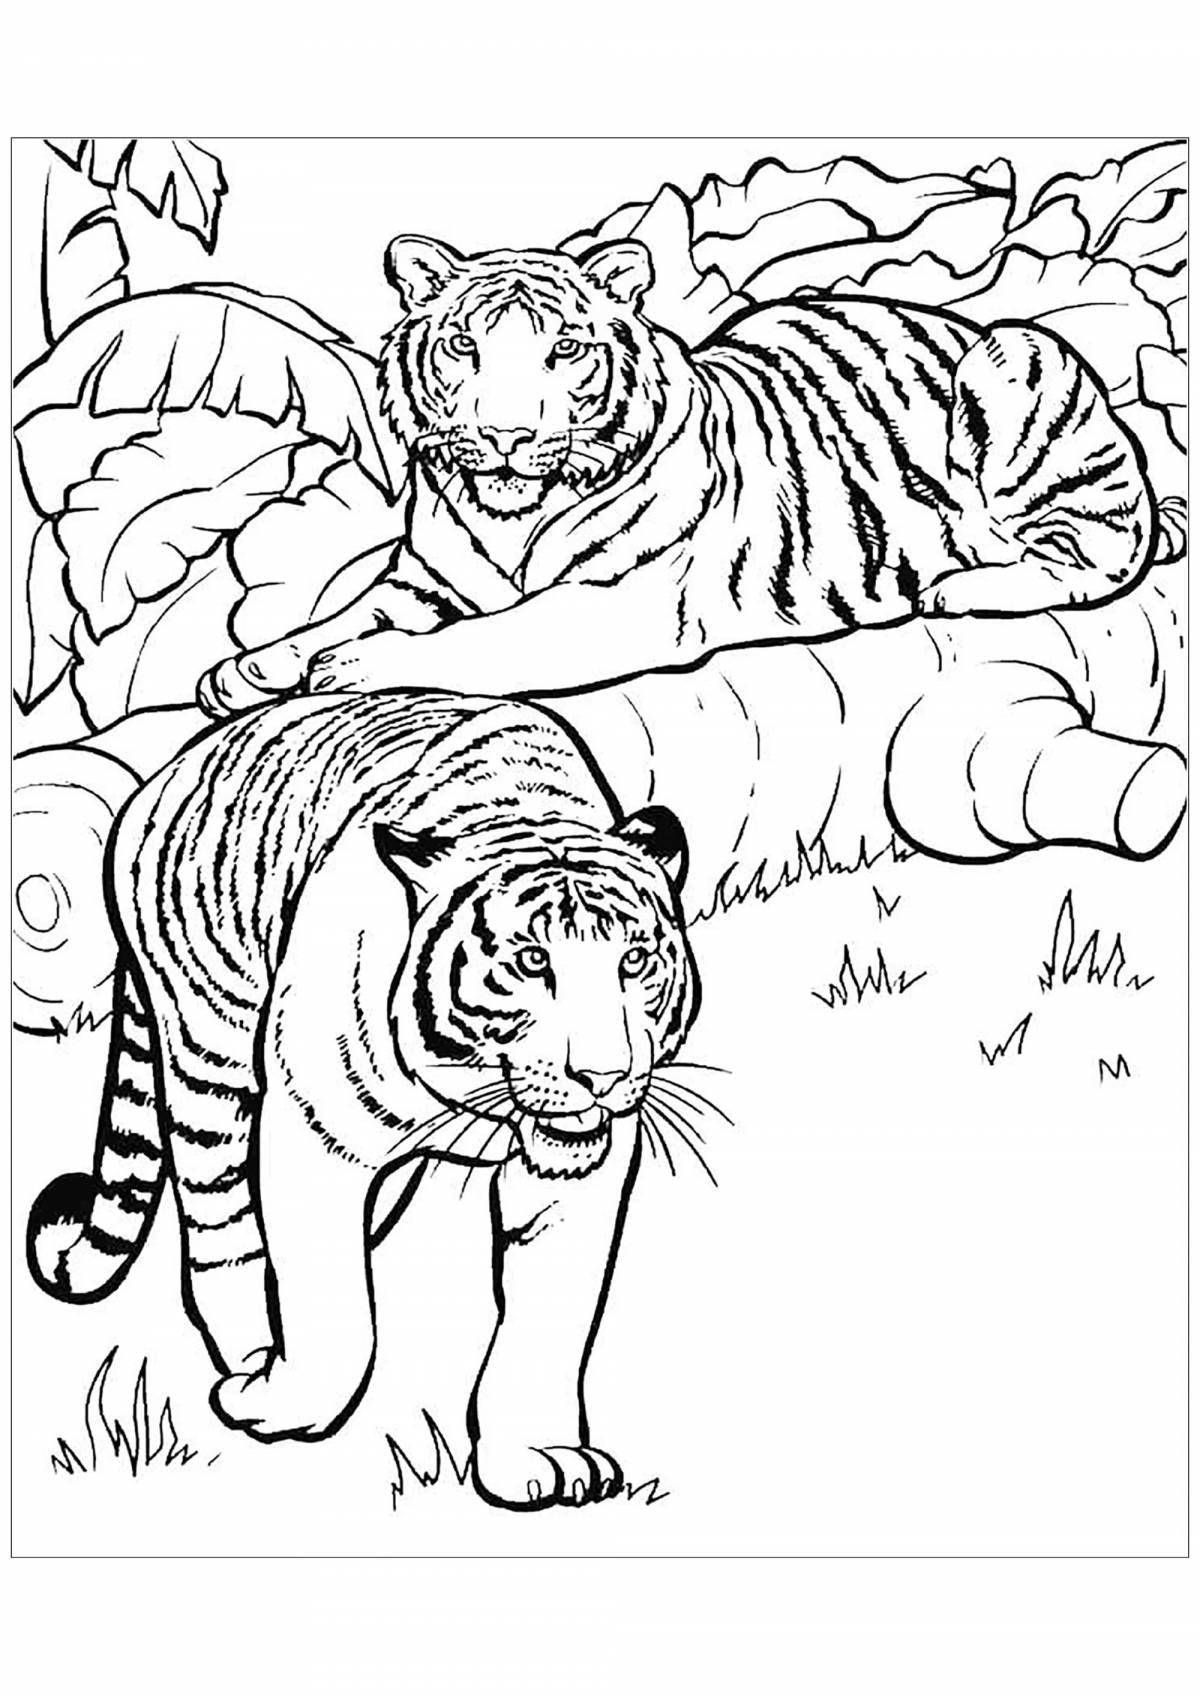 Coloring page loving tigress with cub